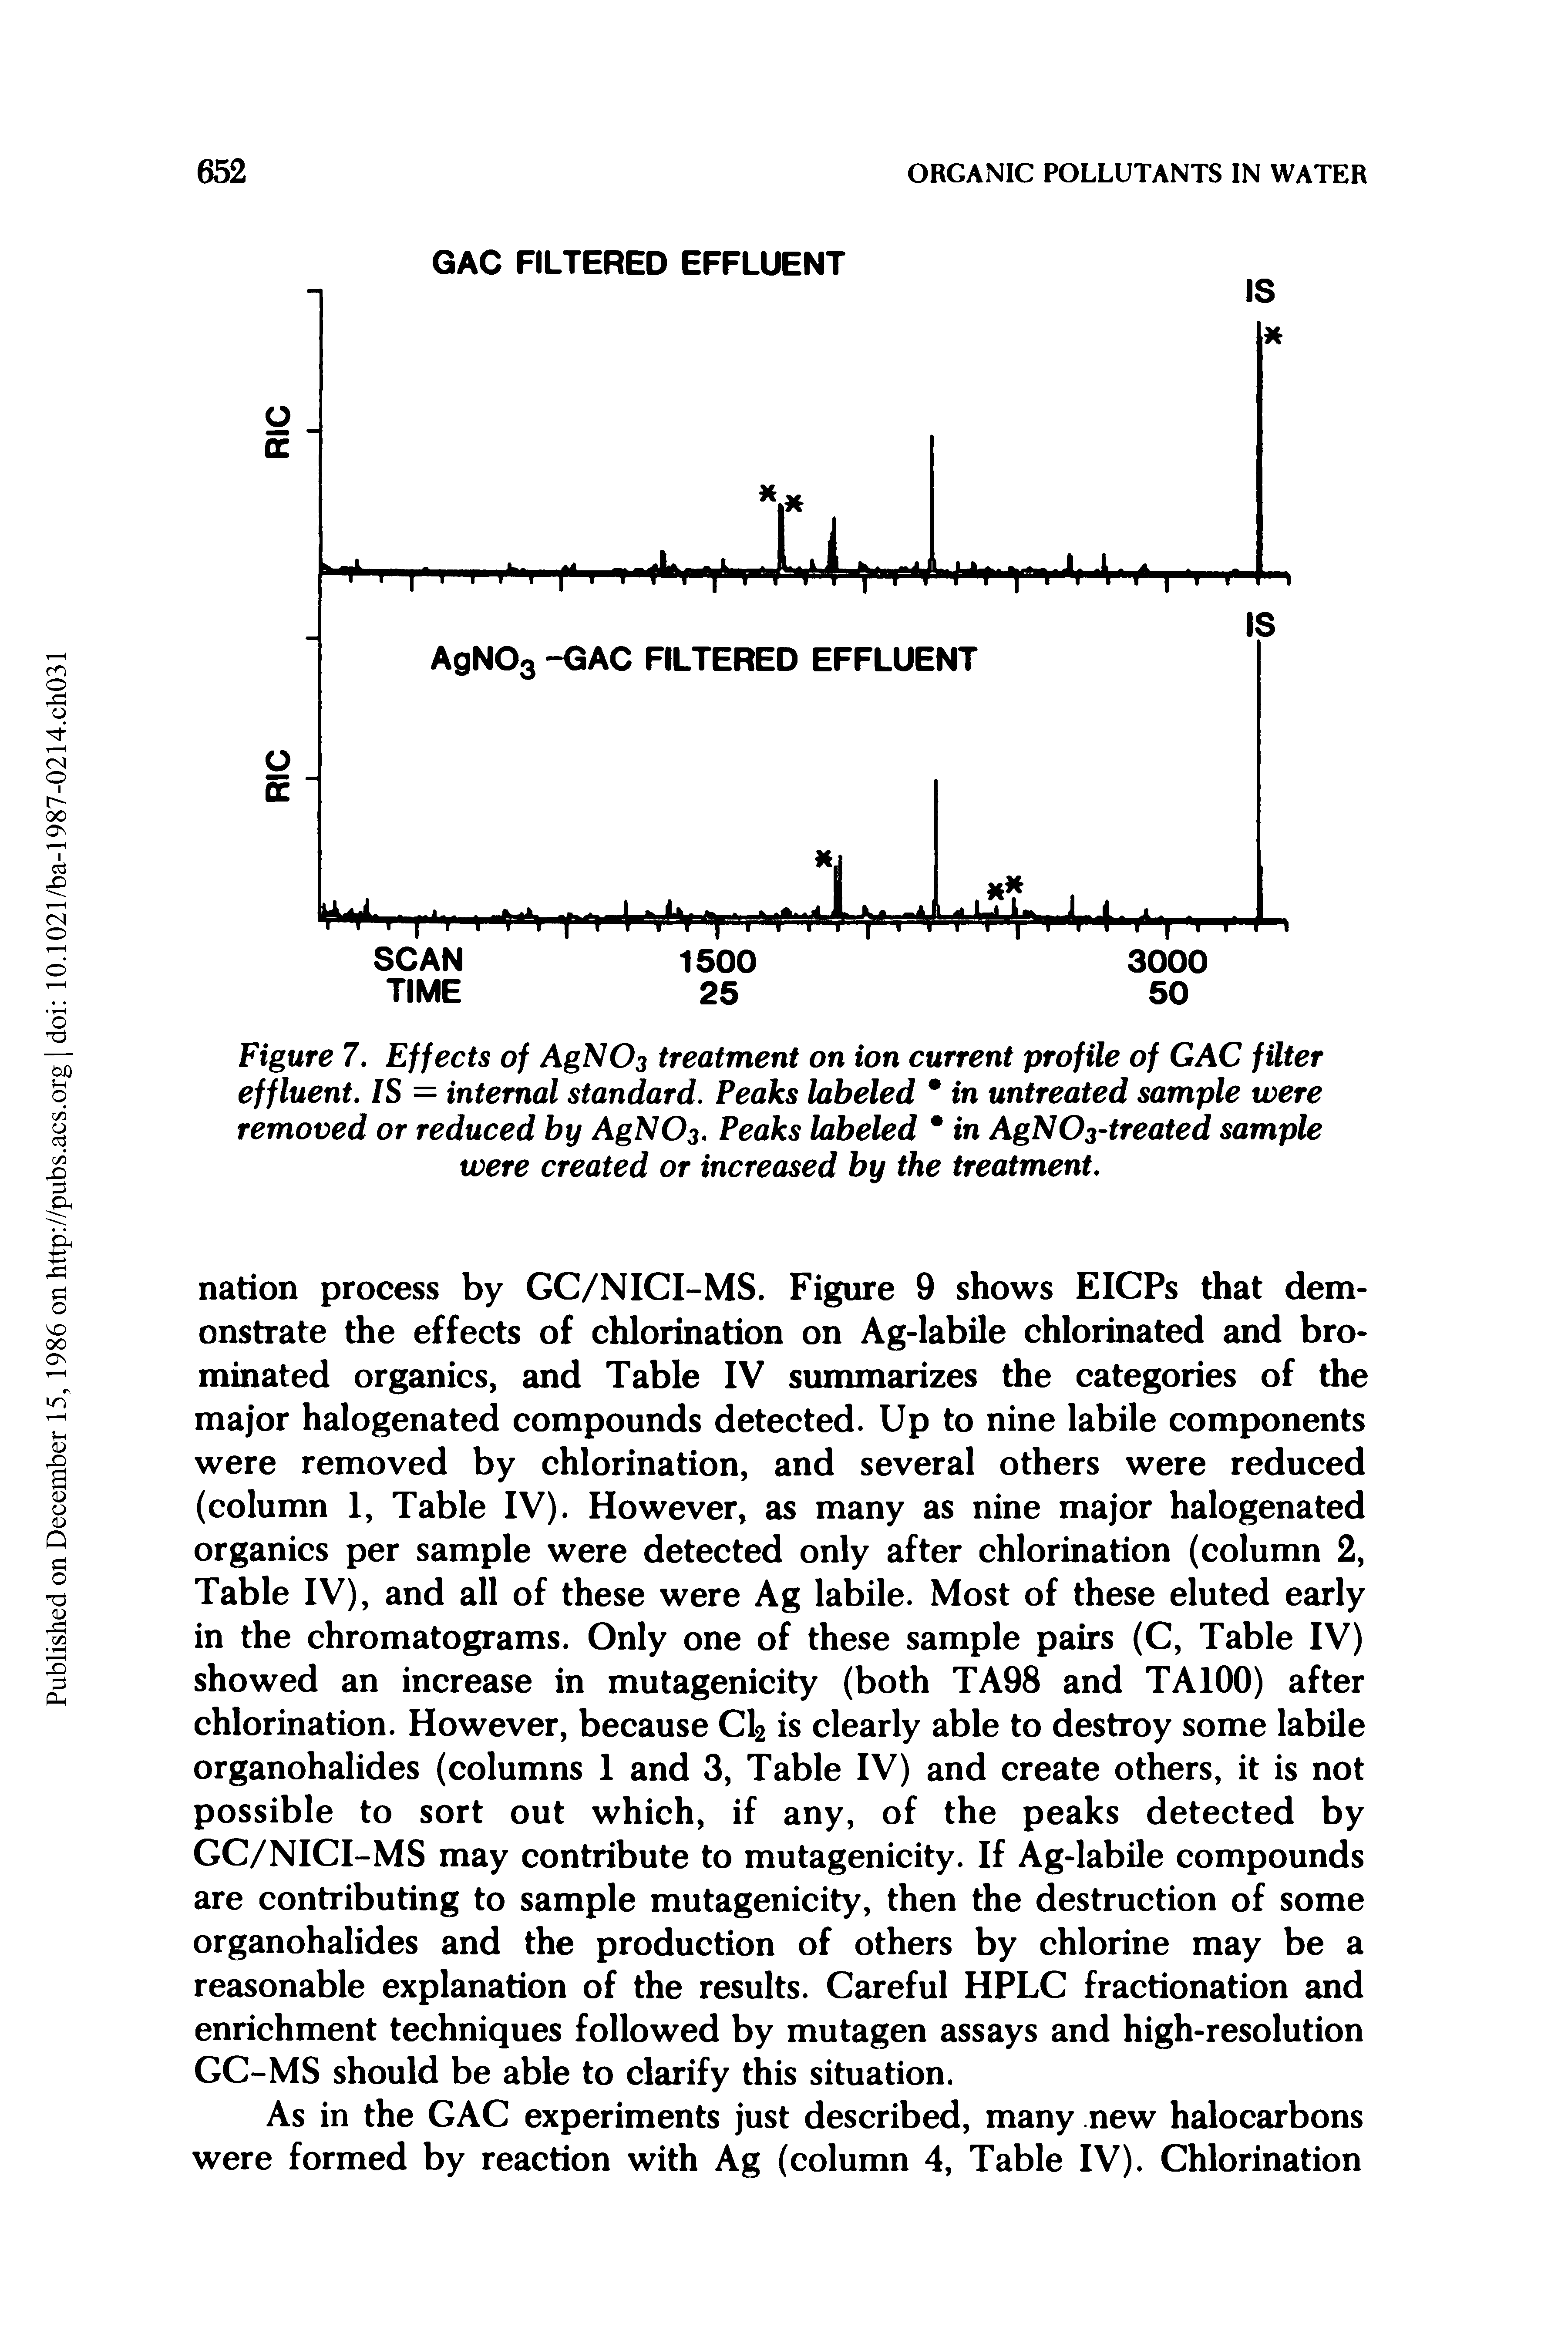 Figure 7. Effects of AgNOs treatment on ion current profile of GAC filter effluent. IS — internal standard. Peaks labeled in untreated sample were removed or reduced by AgNO3. Peaks labeled in AgNC>3-treated sample were created or increased by the treatment.